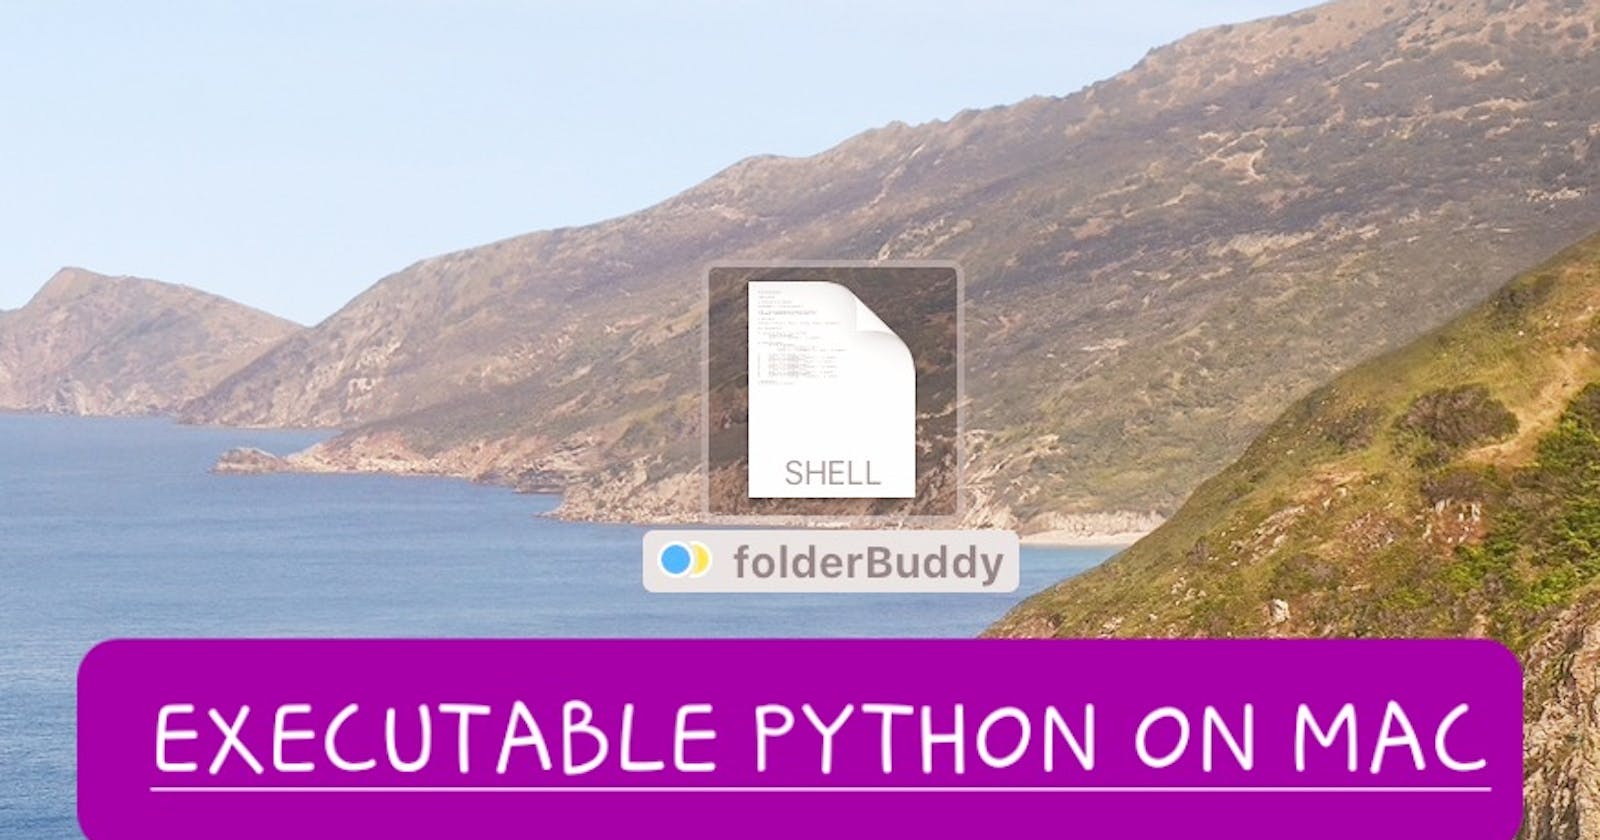 Double click executable python script on Mac! Here is how I did it.